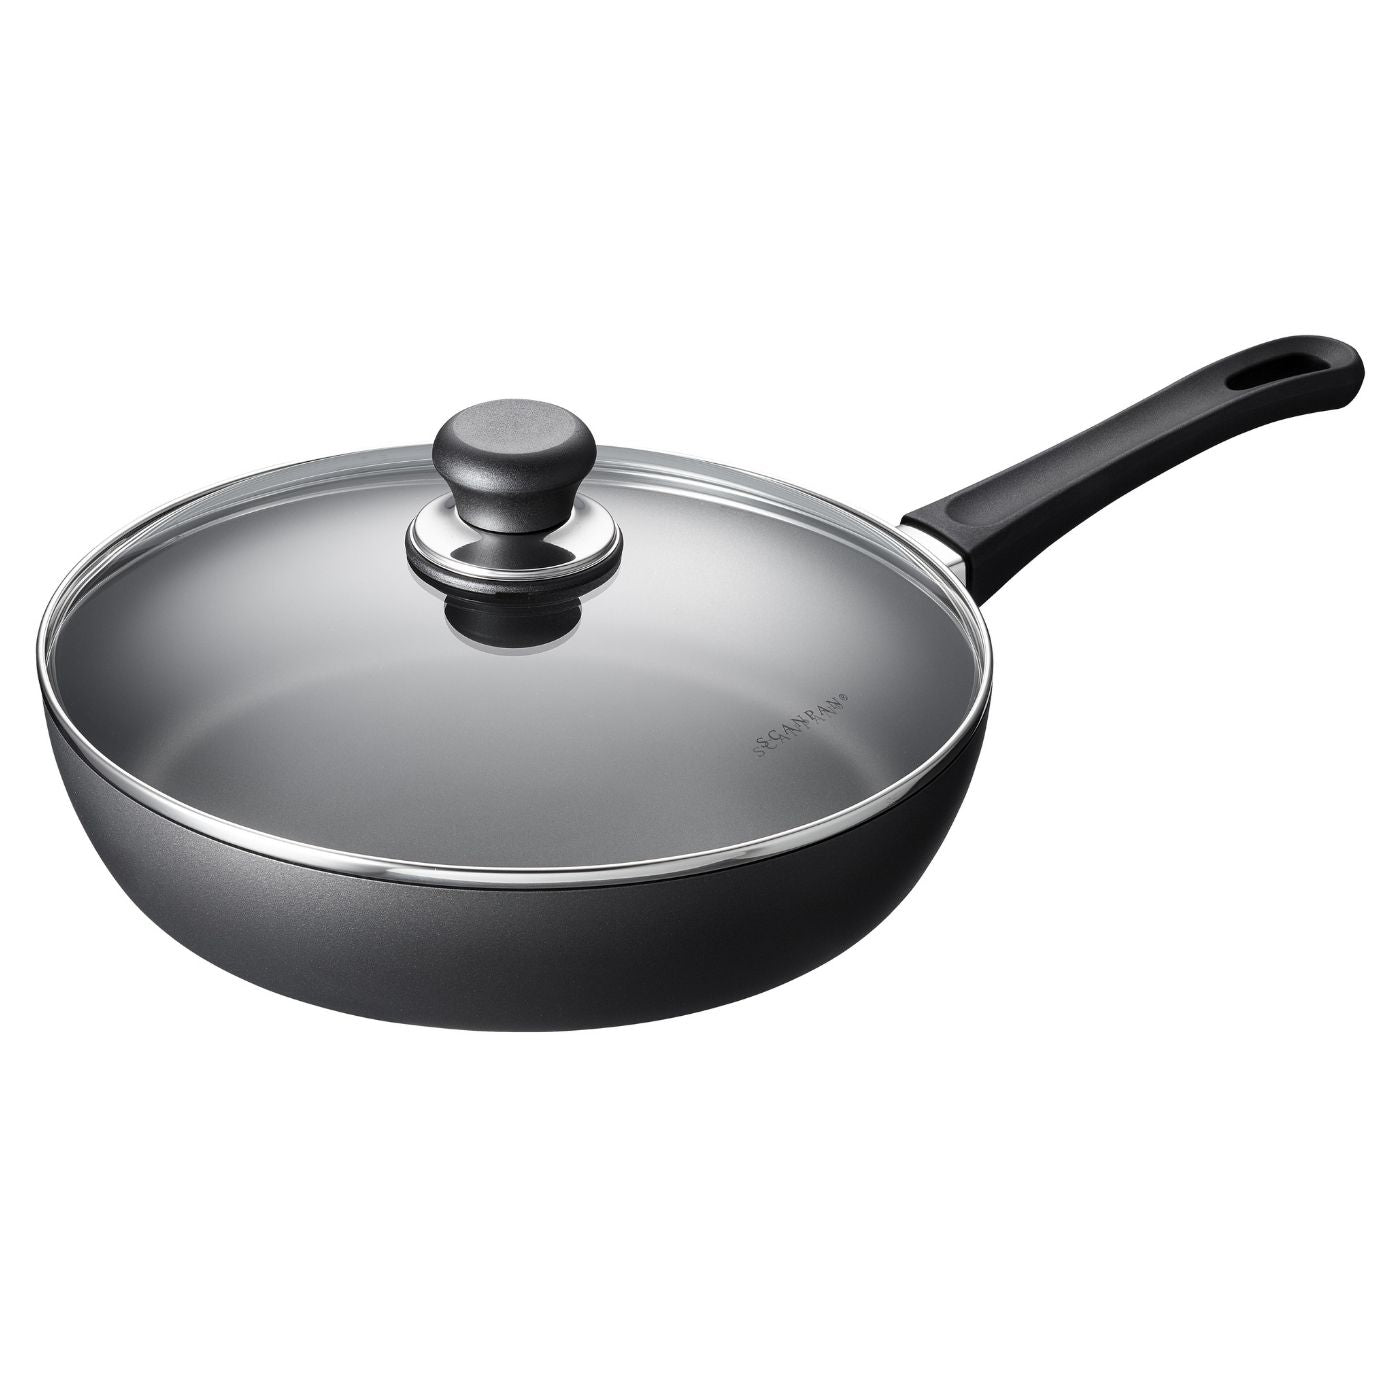 Scanpan Non Stick Classic Induction Saute Pan with Glass Lid -28cm